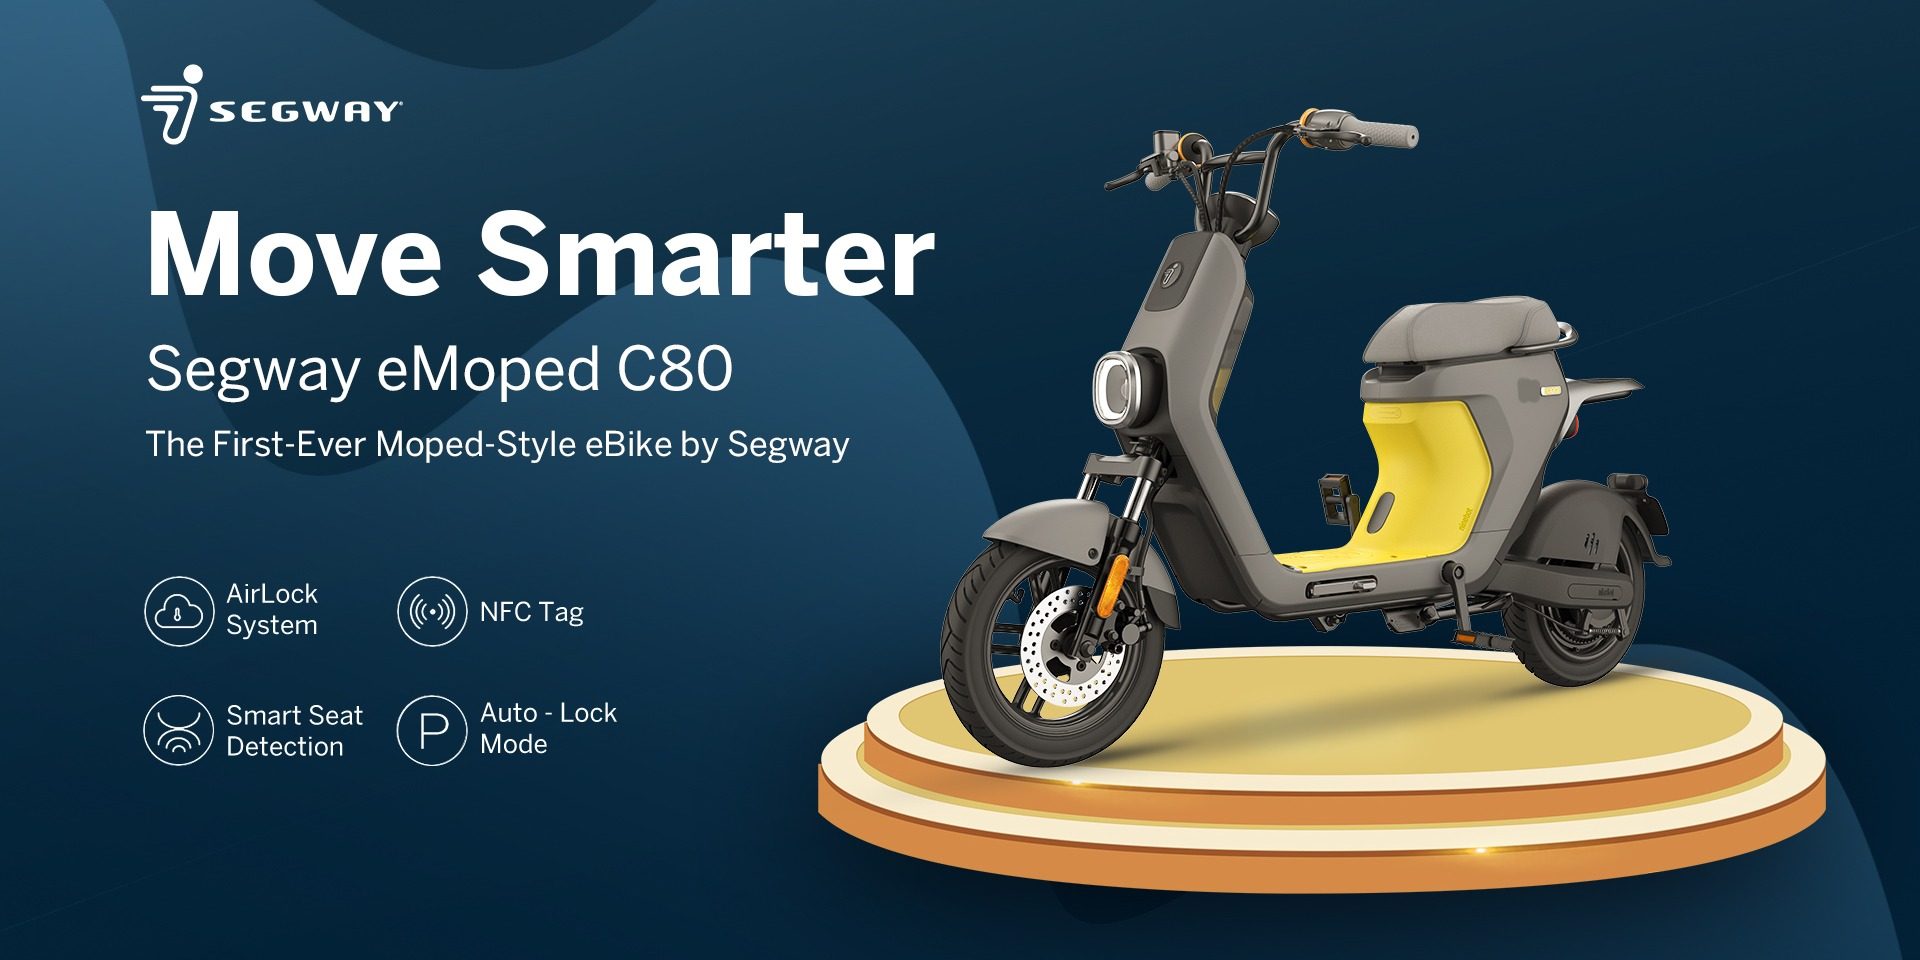 Segway C80 electric moped launched with 50 mile range, affordable price - Blog - 14